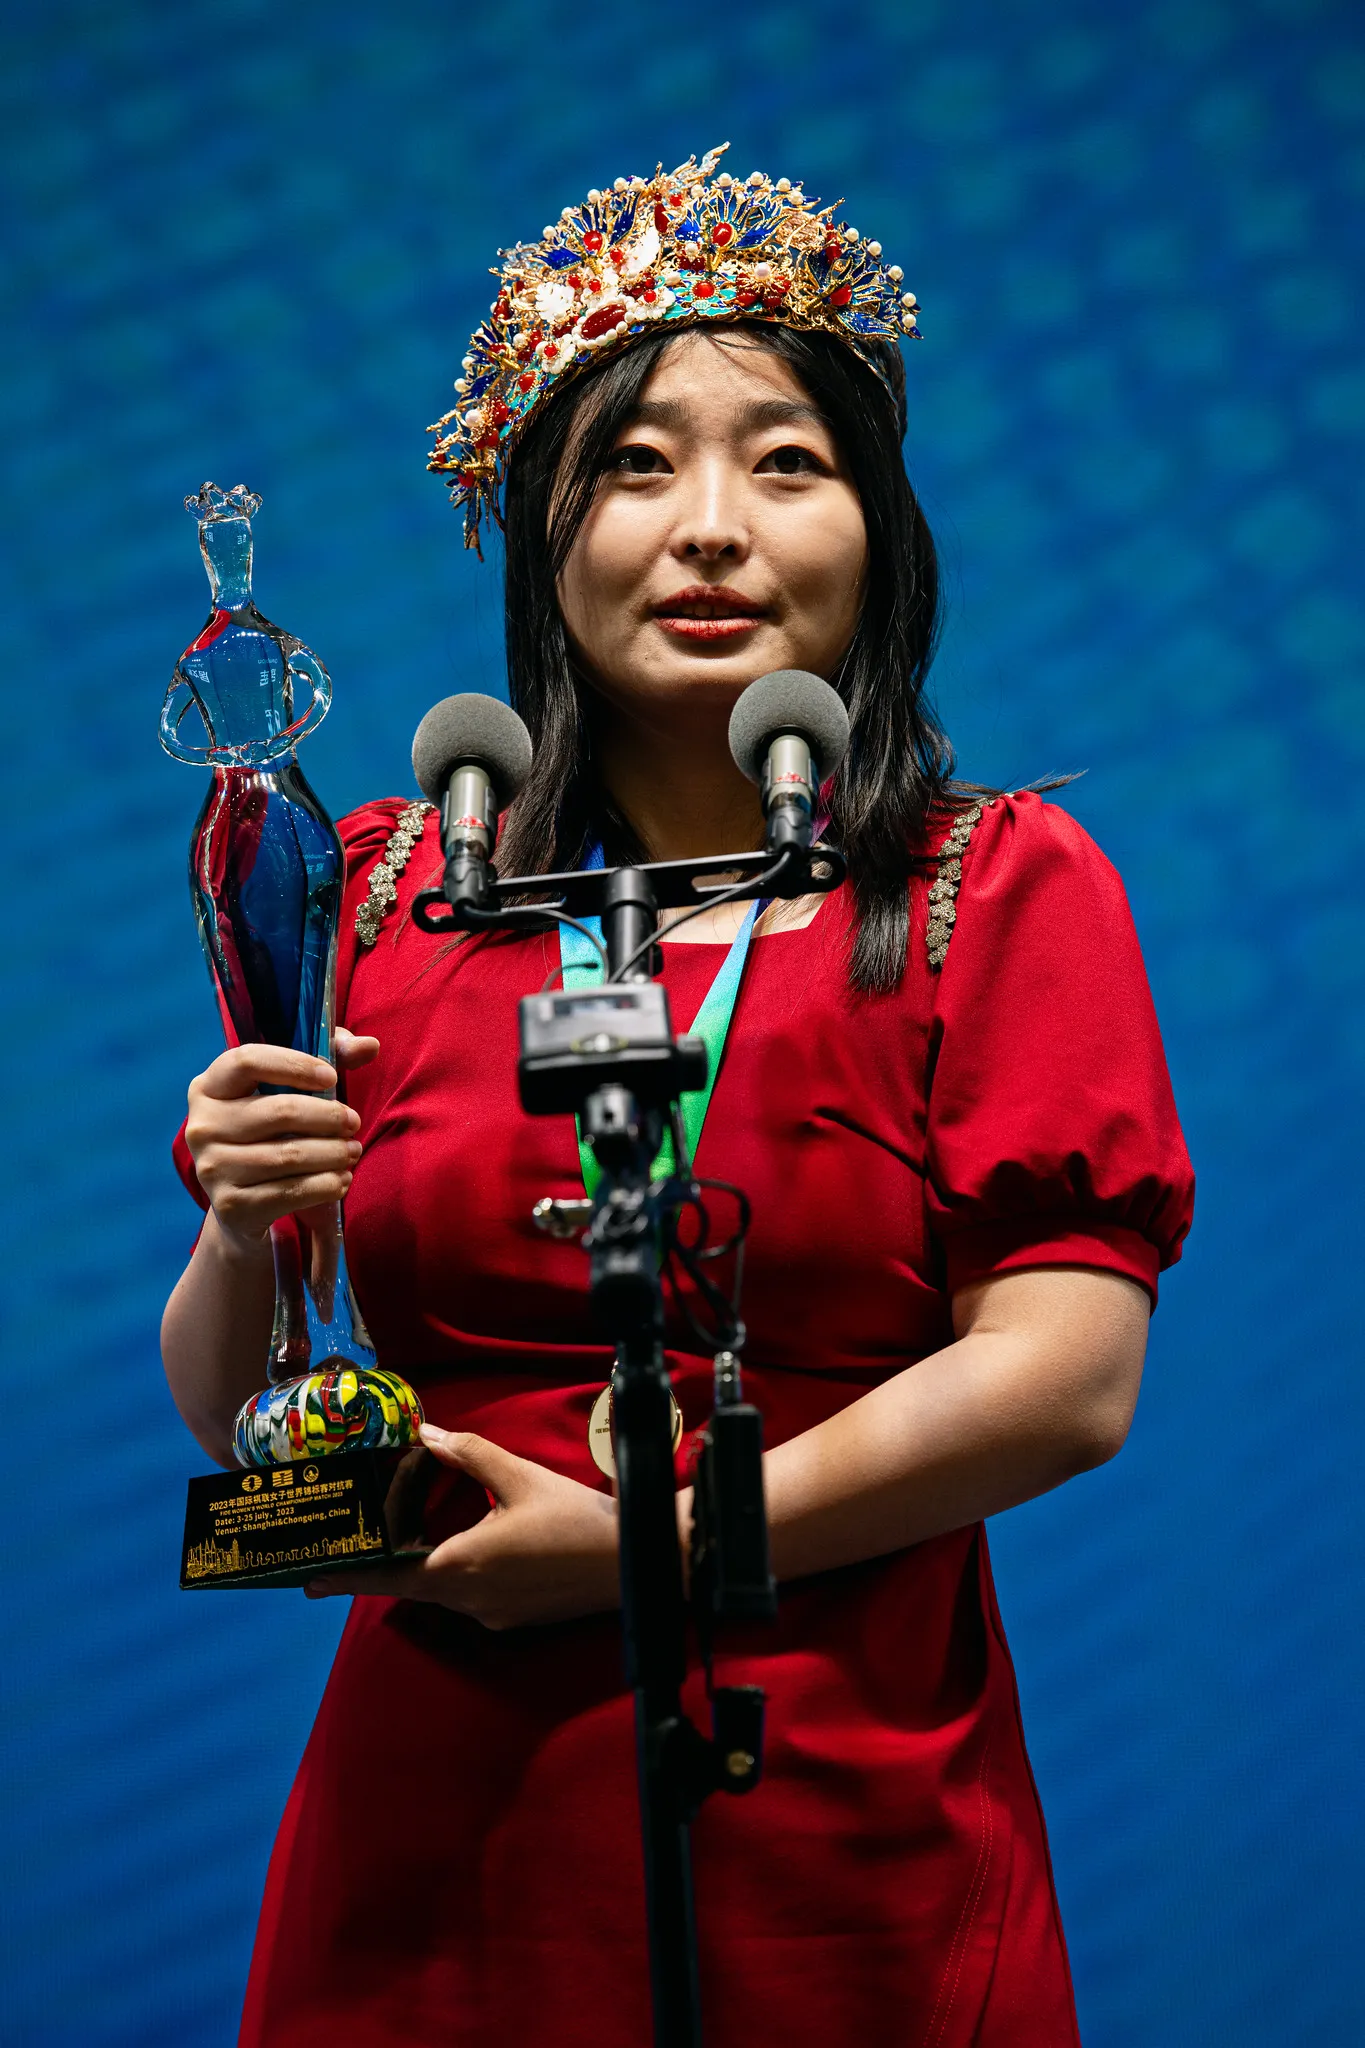 And still the undisputed Queen of Chess, the four-time World Champion, Ju Wenjun. Credit: FIDE / Stev Bonhage.